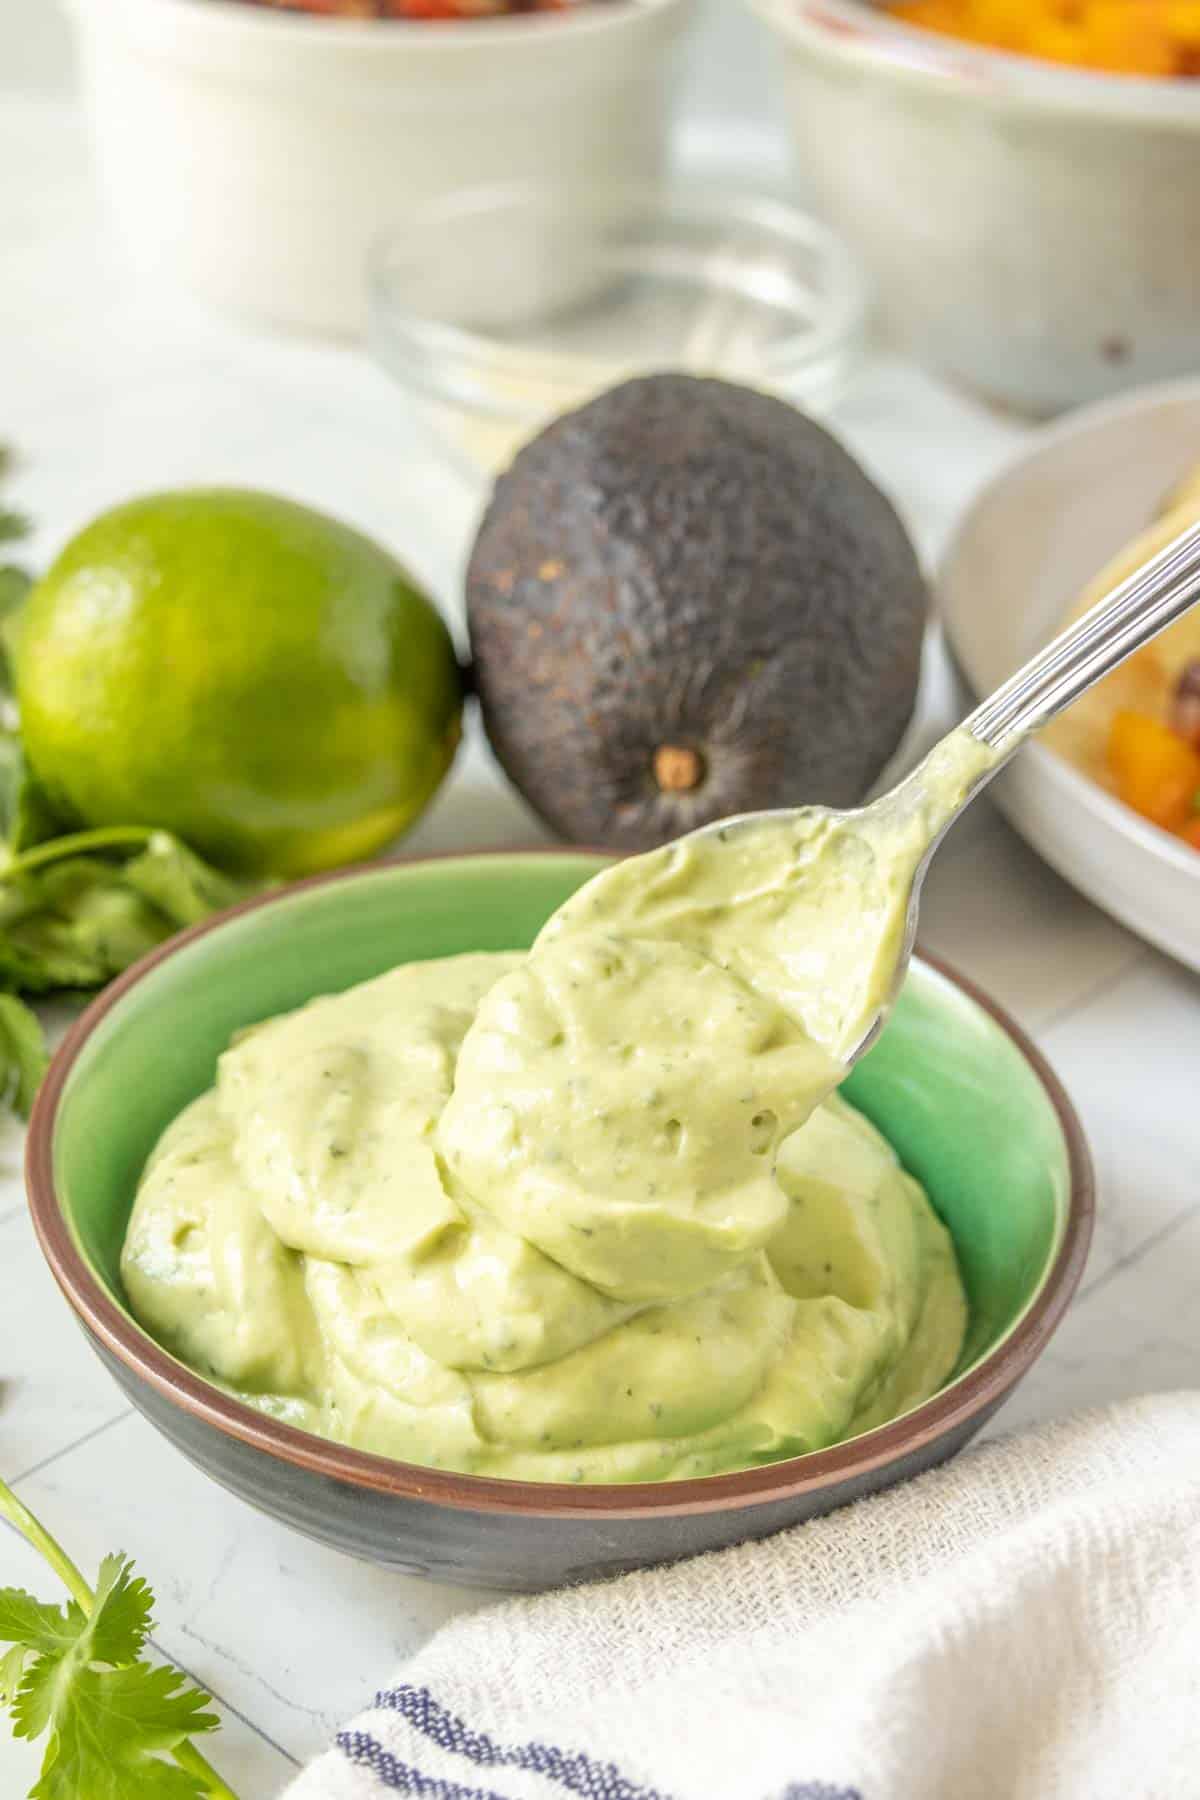 Avocado crema in a bowl with limes and cilantro.